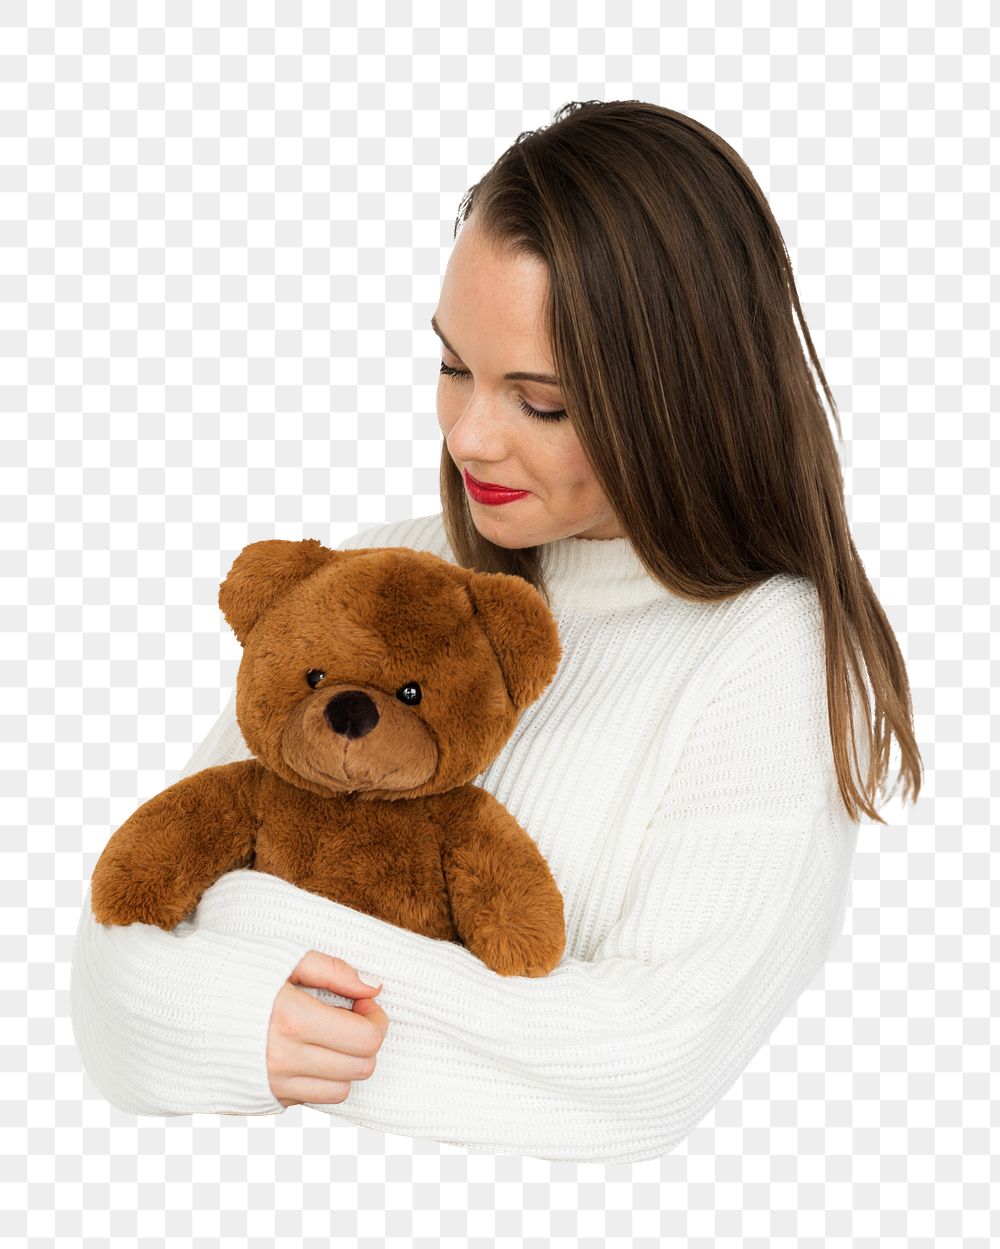 Woman holding teddy png, transparent background